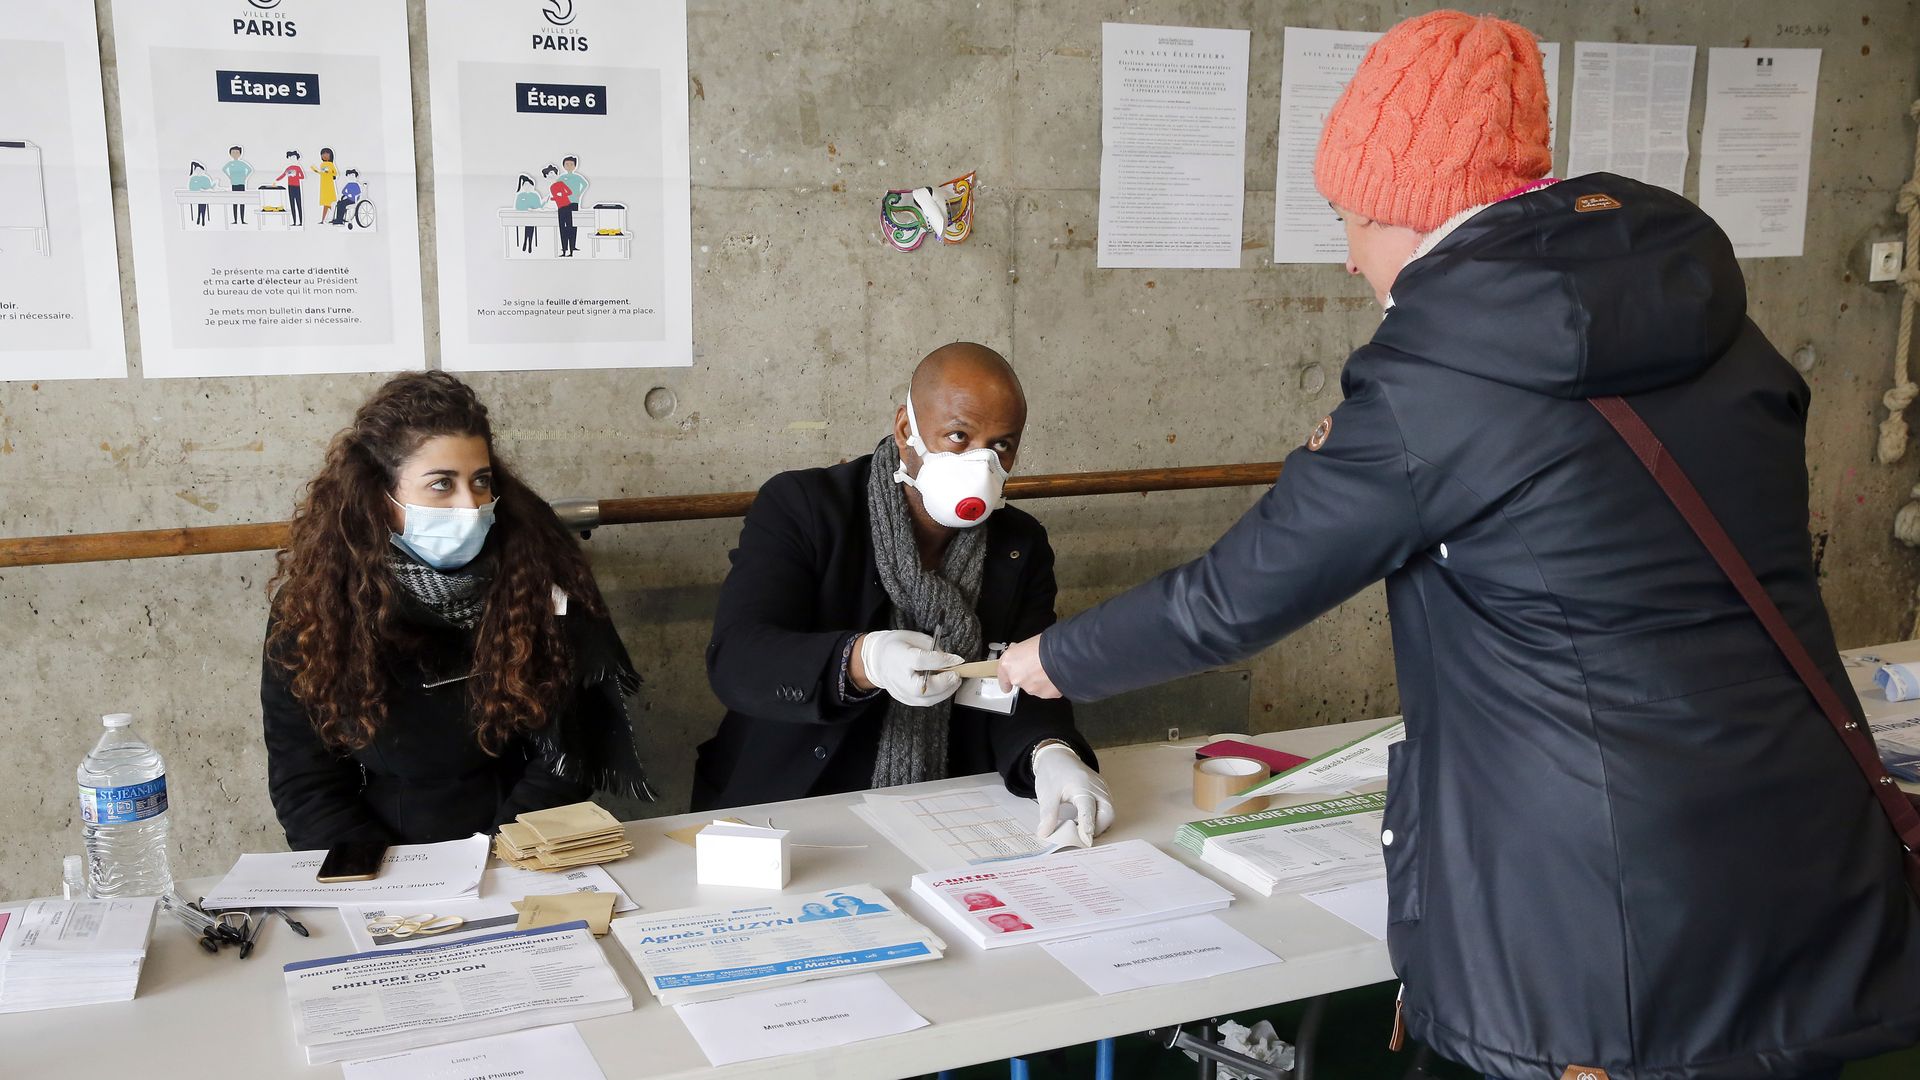 Electoral assessors wearing protective masks give a voting ballot.